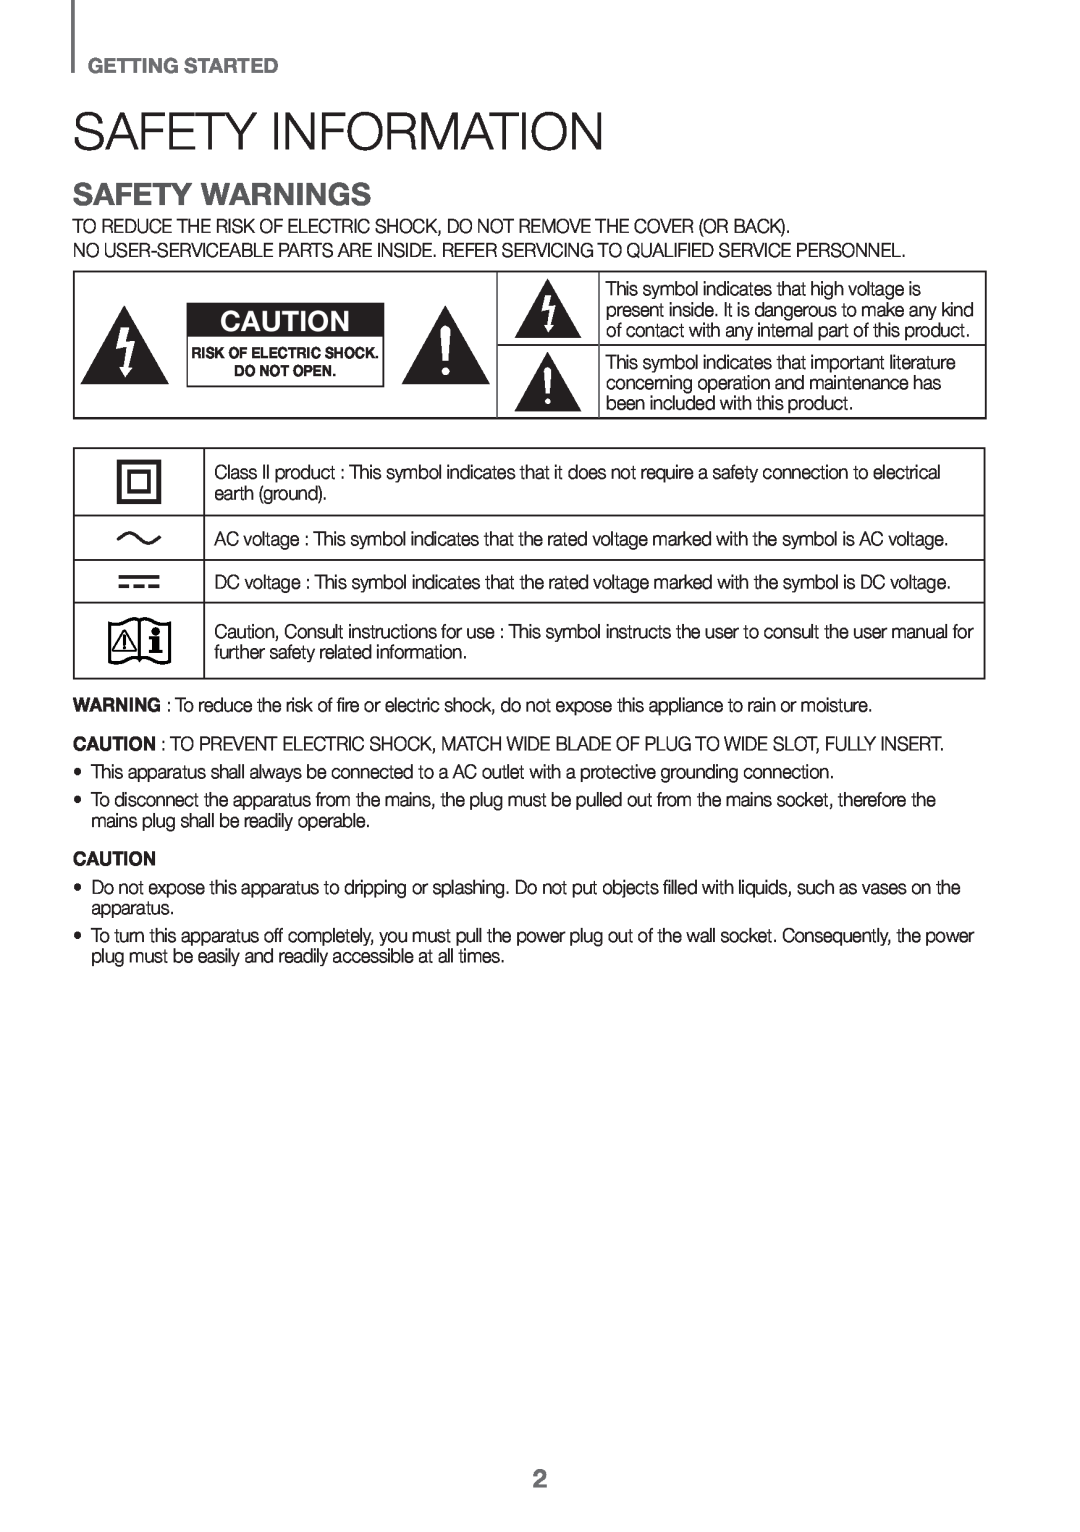 Samsung HW-K651/ZF, HW-K651/EN, HW-K650/EN, HW-K650/ZF, HW-K660/XE manual Safety Information, Safety Warnings, Getting Started 